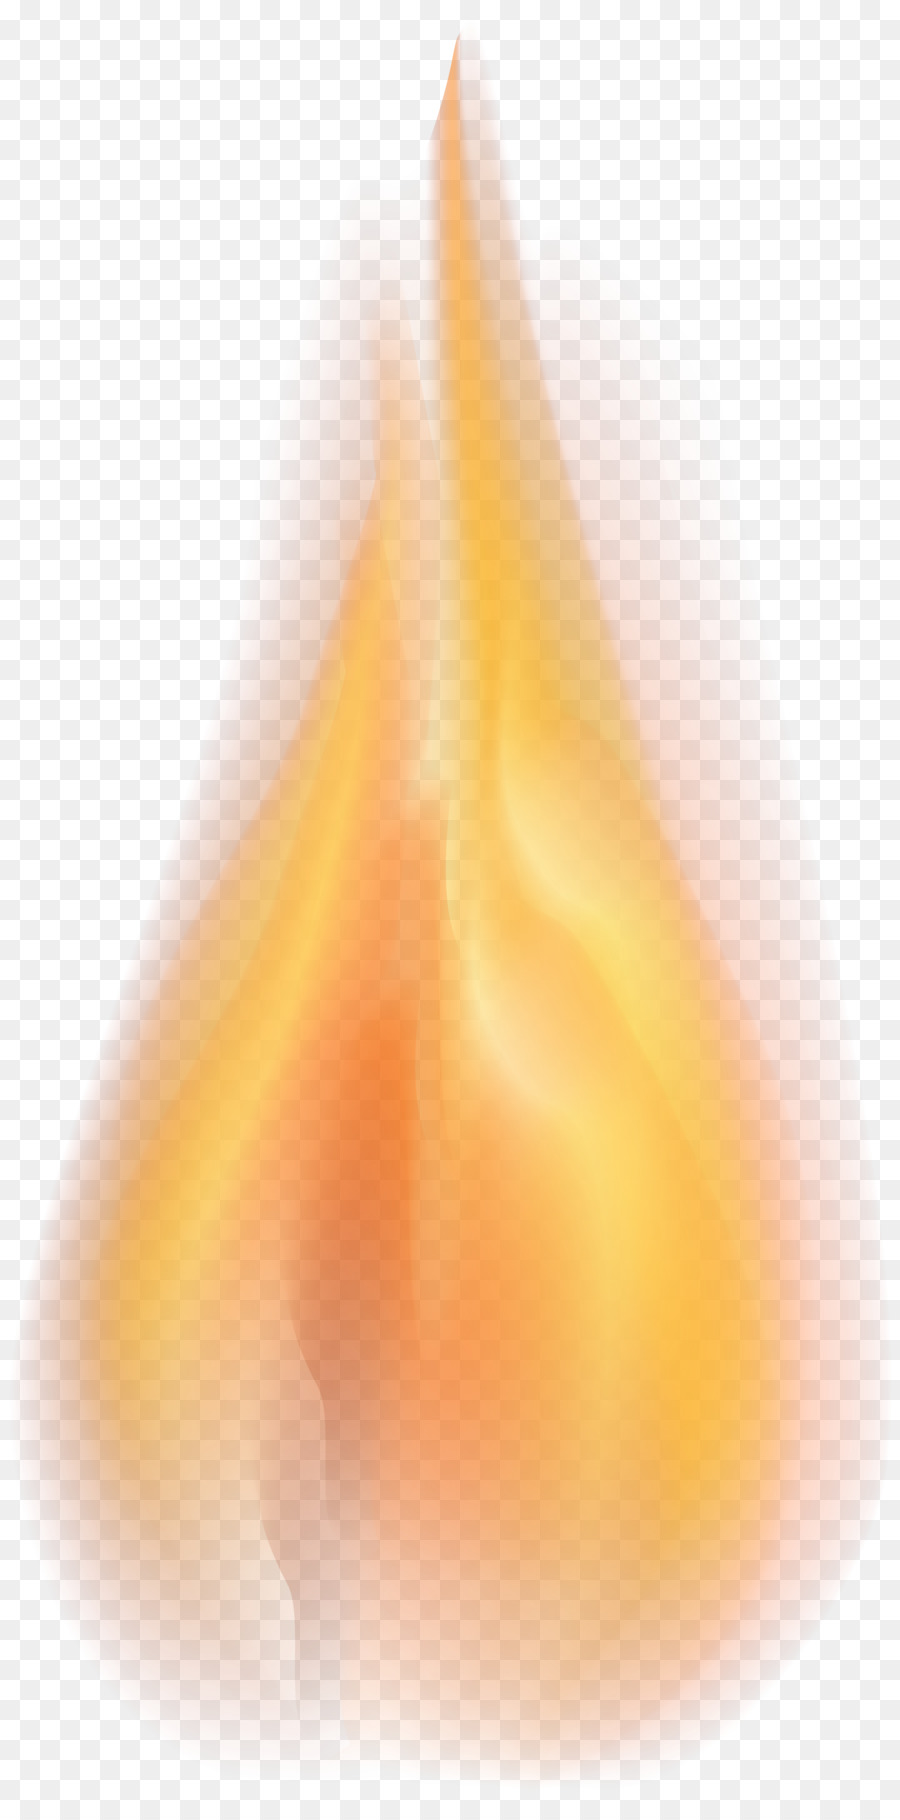 Flame Fire Desktop Wallpaper Close-up Wax - flame png download - 3979*8000 - Free Transparent Flame png Download.